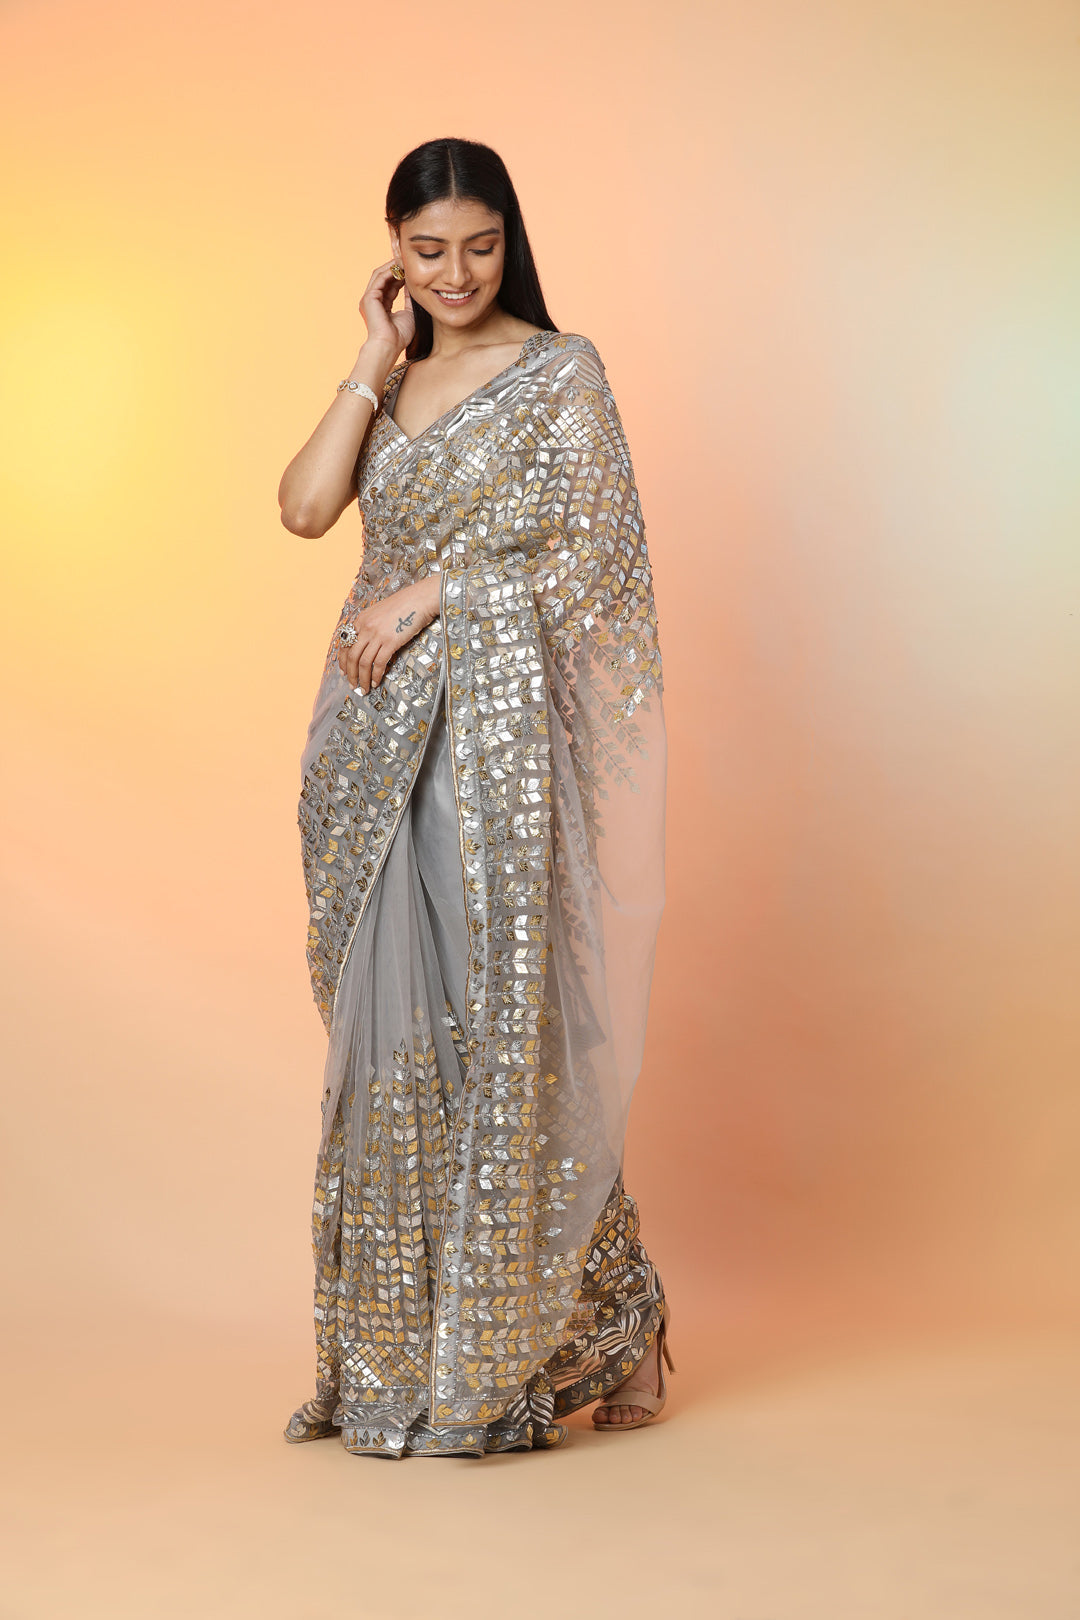 Buy beautiful grey diamond applique work designer sari online in USA with blouse. Radiate glamor on special occasions in exquisite designer sarees, embroidered sarees, partywear saris, Bollywood sarees, fancy sarees from from Pure Elegance Indian saree store in USA.-left